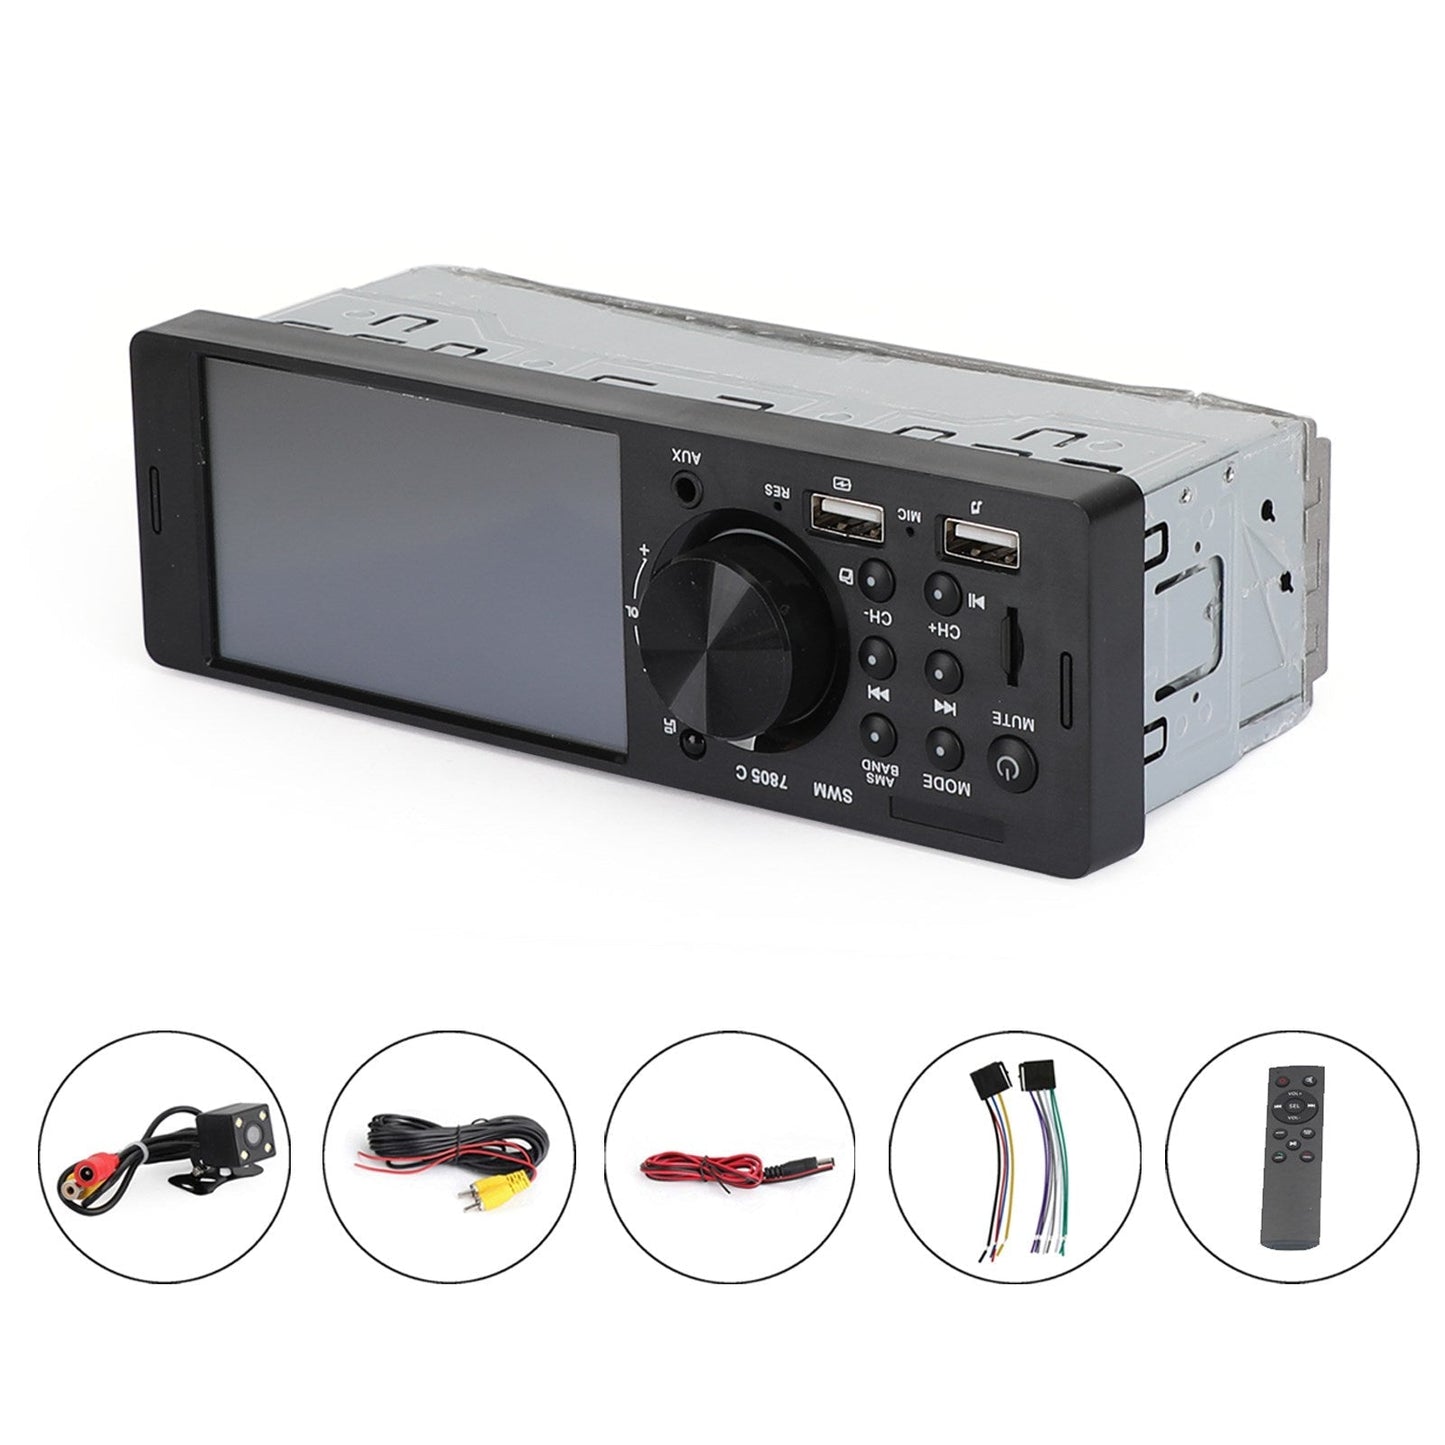 4.1 Inch Touch Screen Car MP5 Player 1 Din Car Stereo Bluetooth + Backup Camera